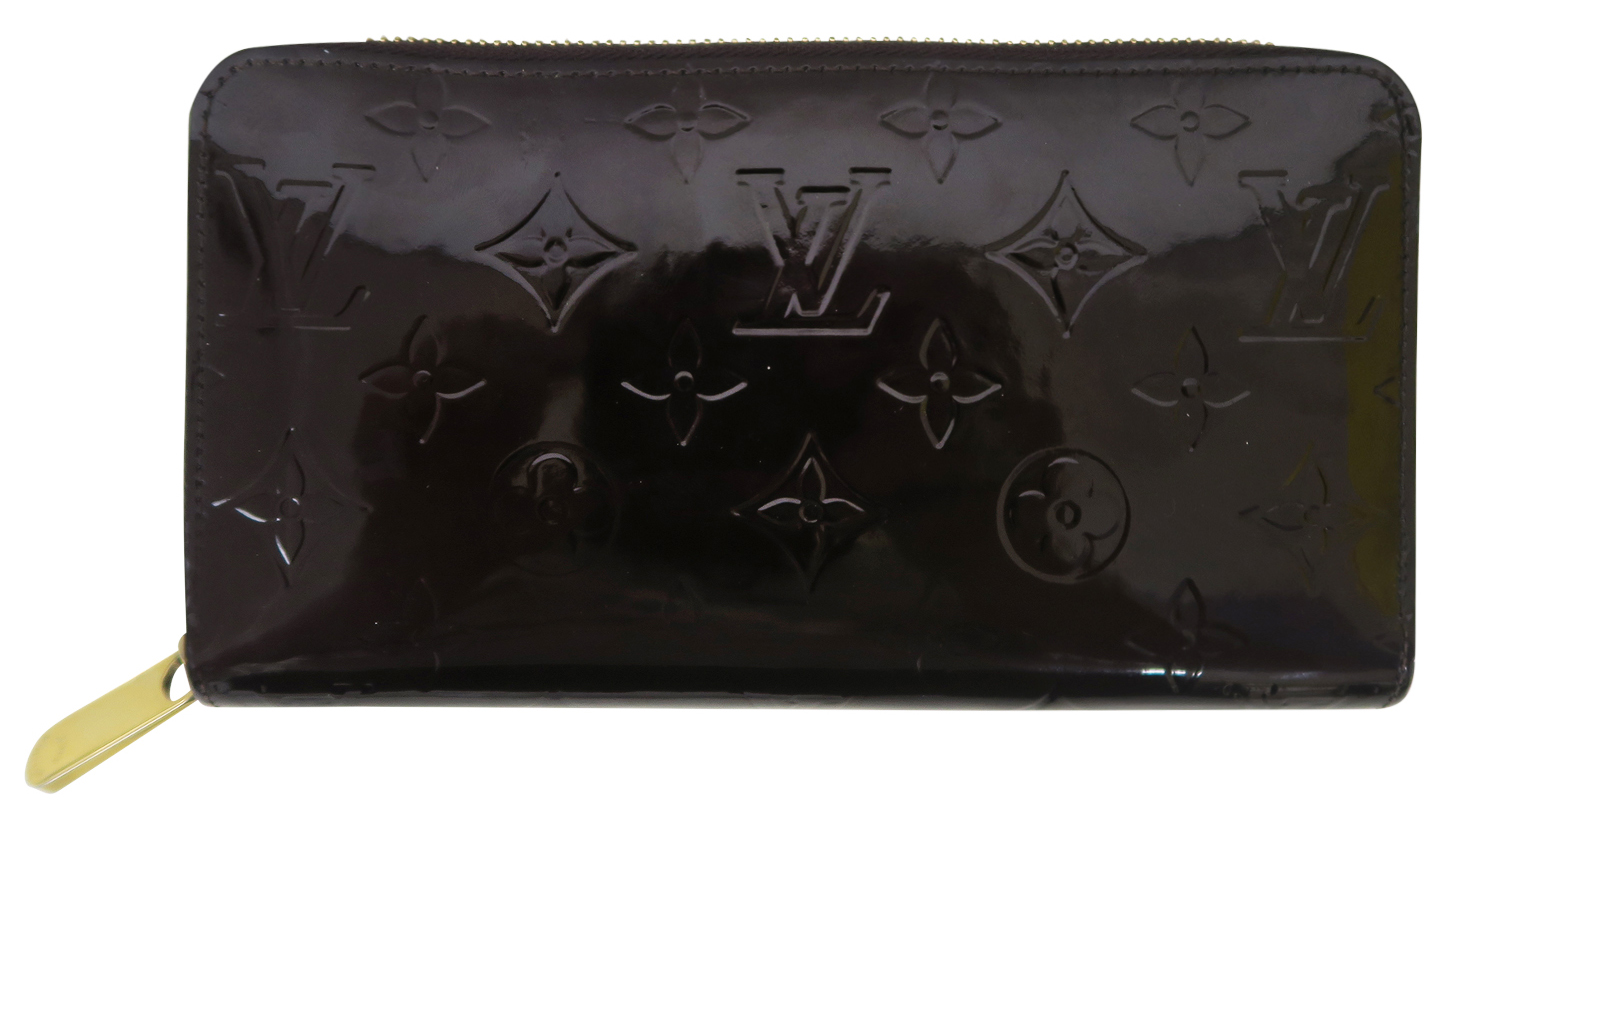 vernis leather wallets